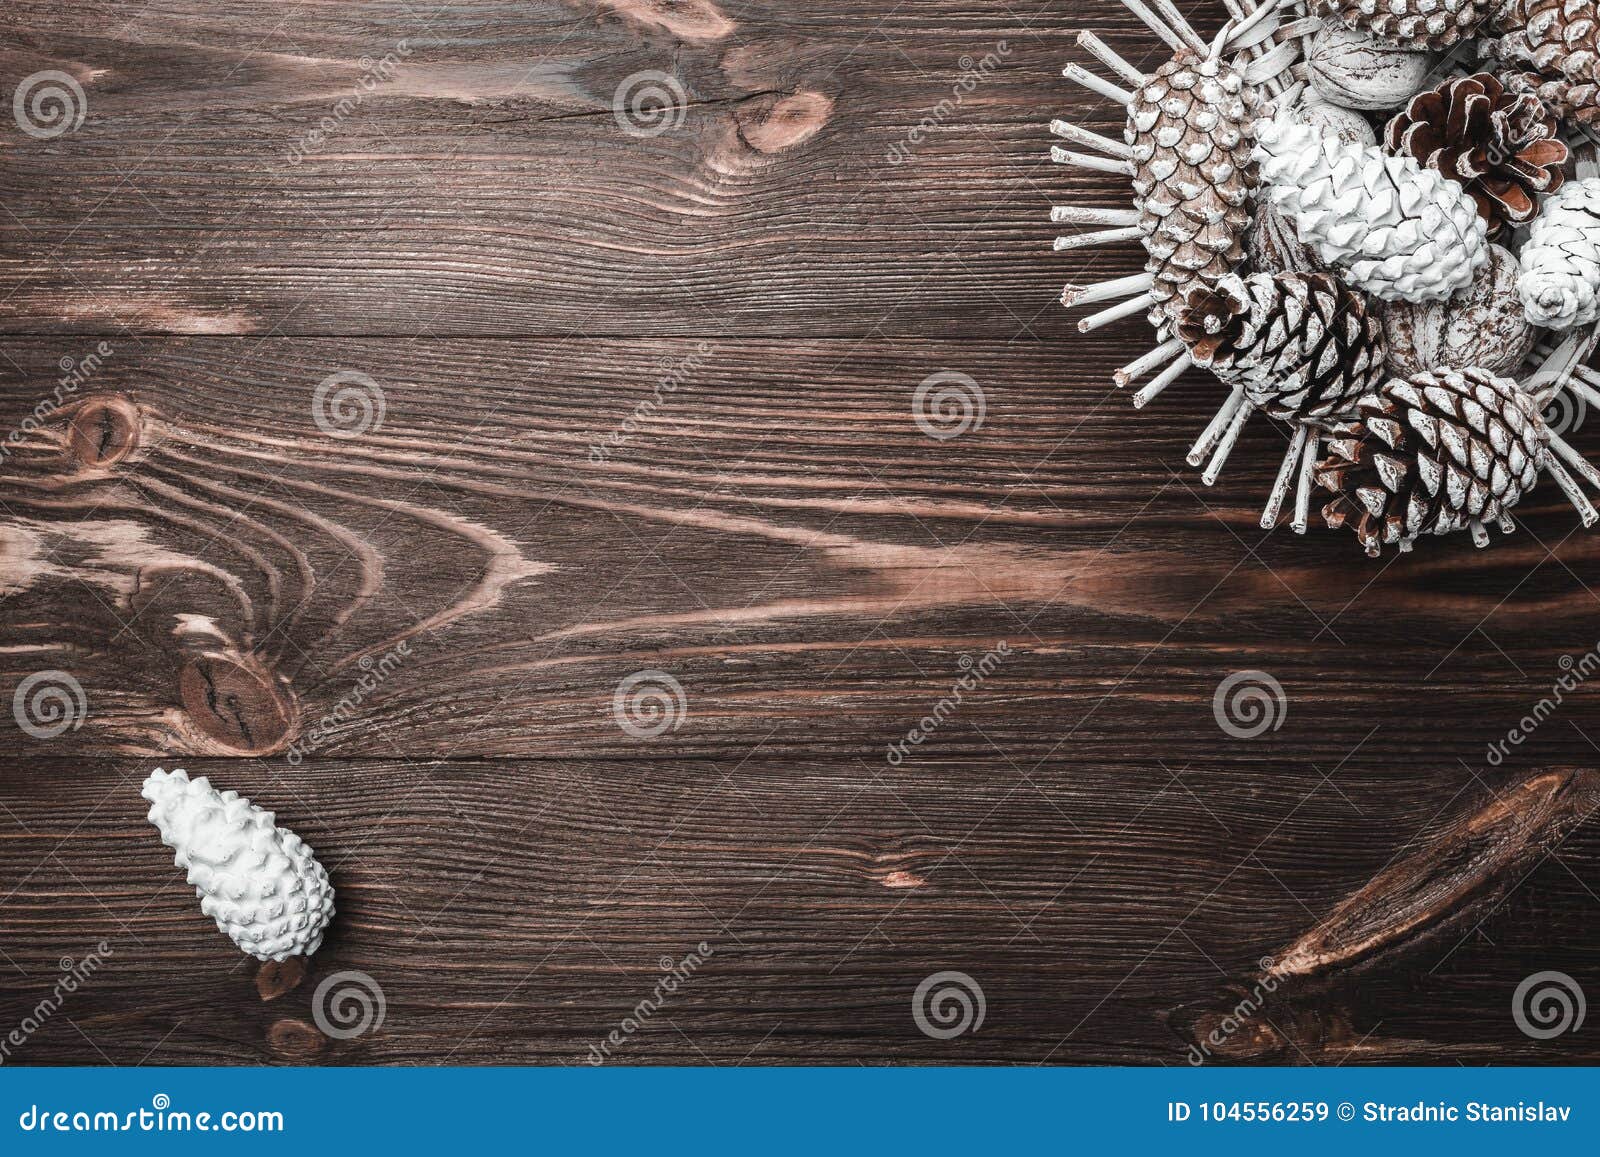 brown wood background with texture. decorative fir cones. fellowship, new year and xmas.